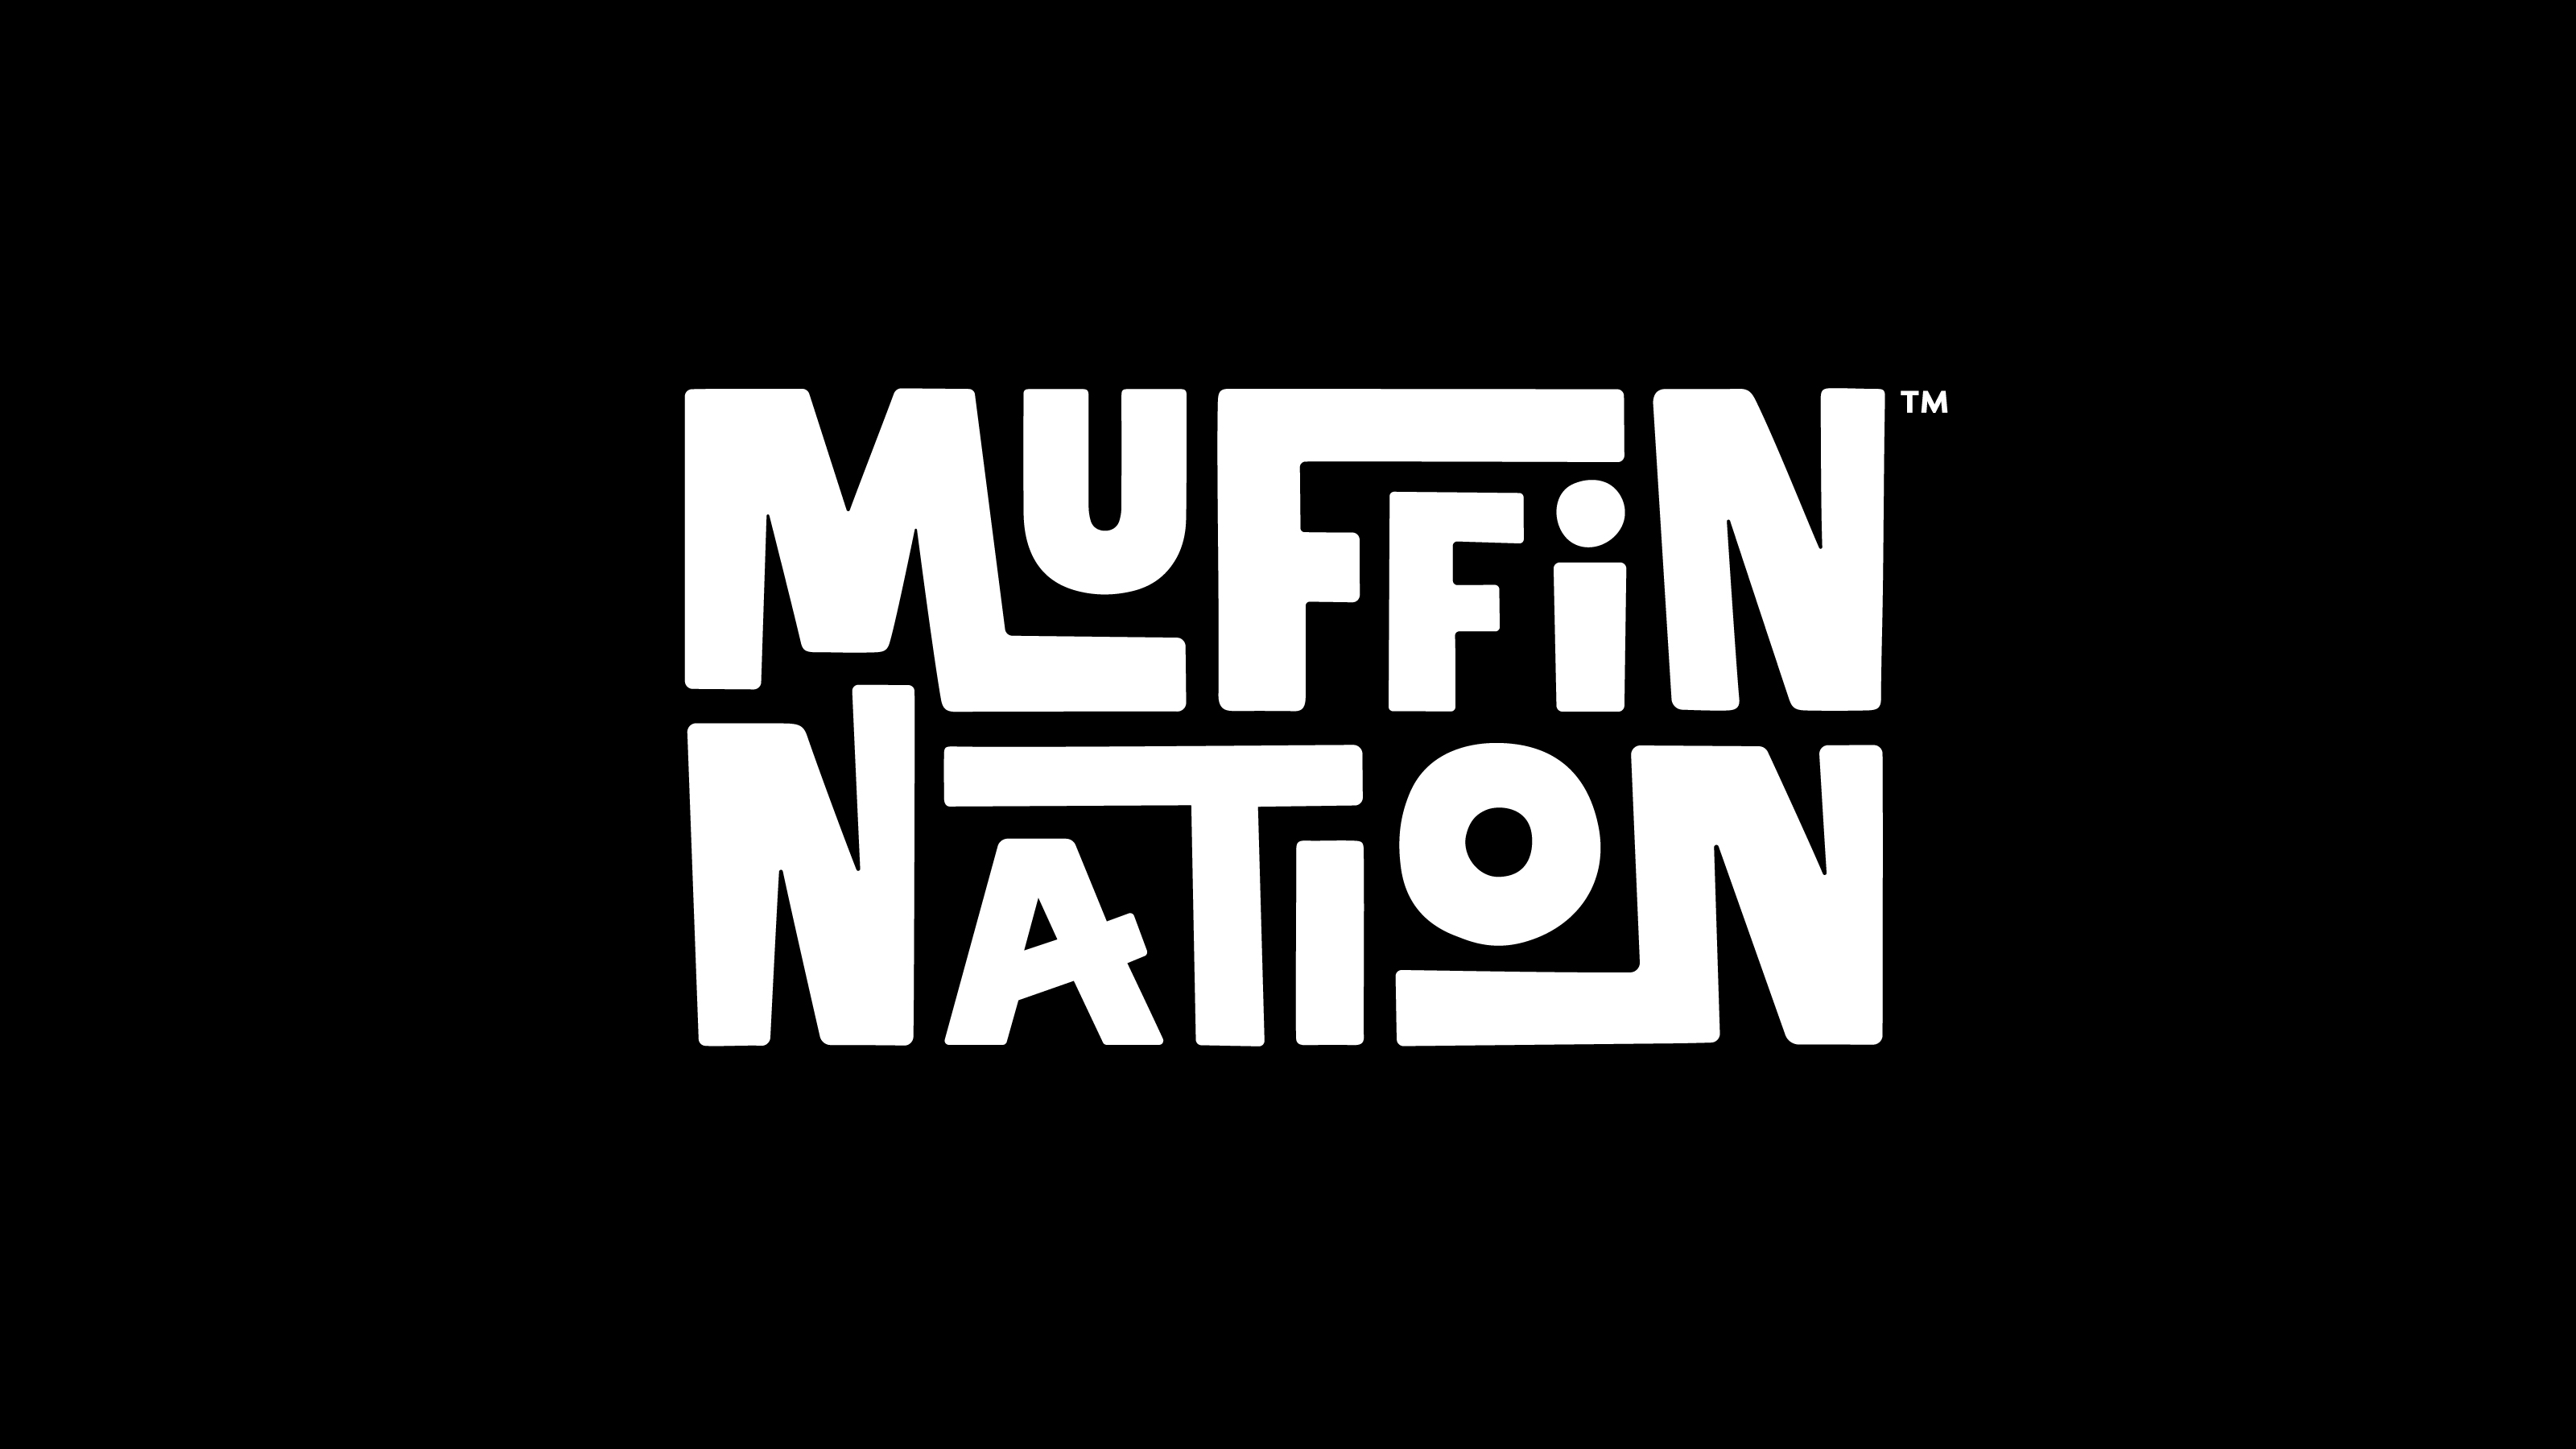 B&B Studio Predicts Big Things for Muffins With Brand Creation Muffin Nation